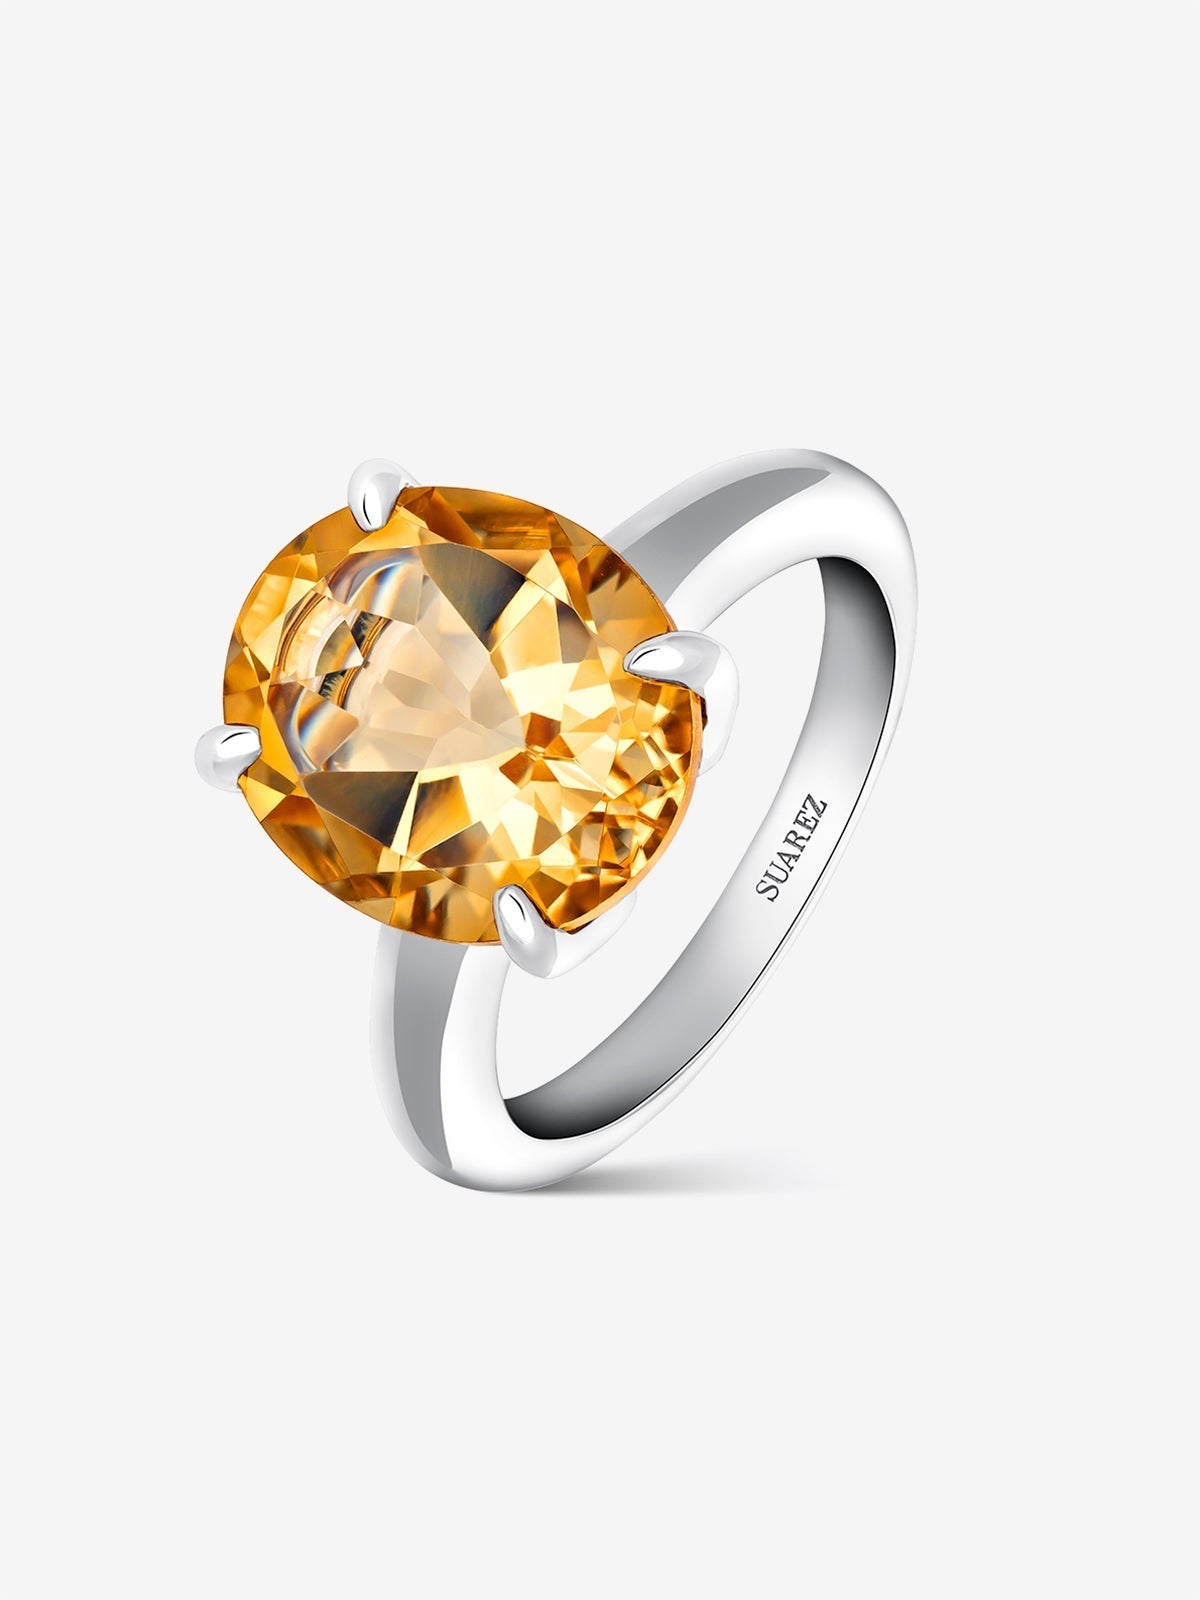 925 silver cocktail ring with oval-cut citrine quartz of 3.89 cts